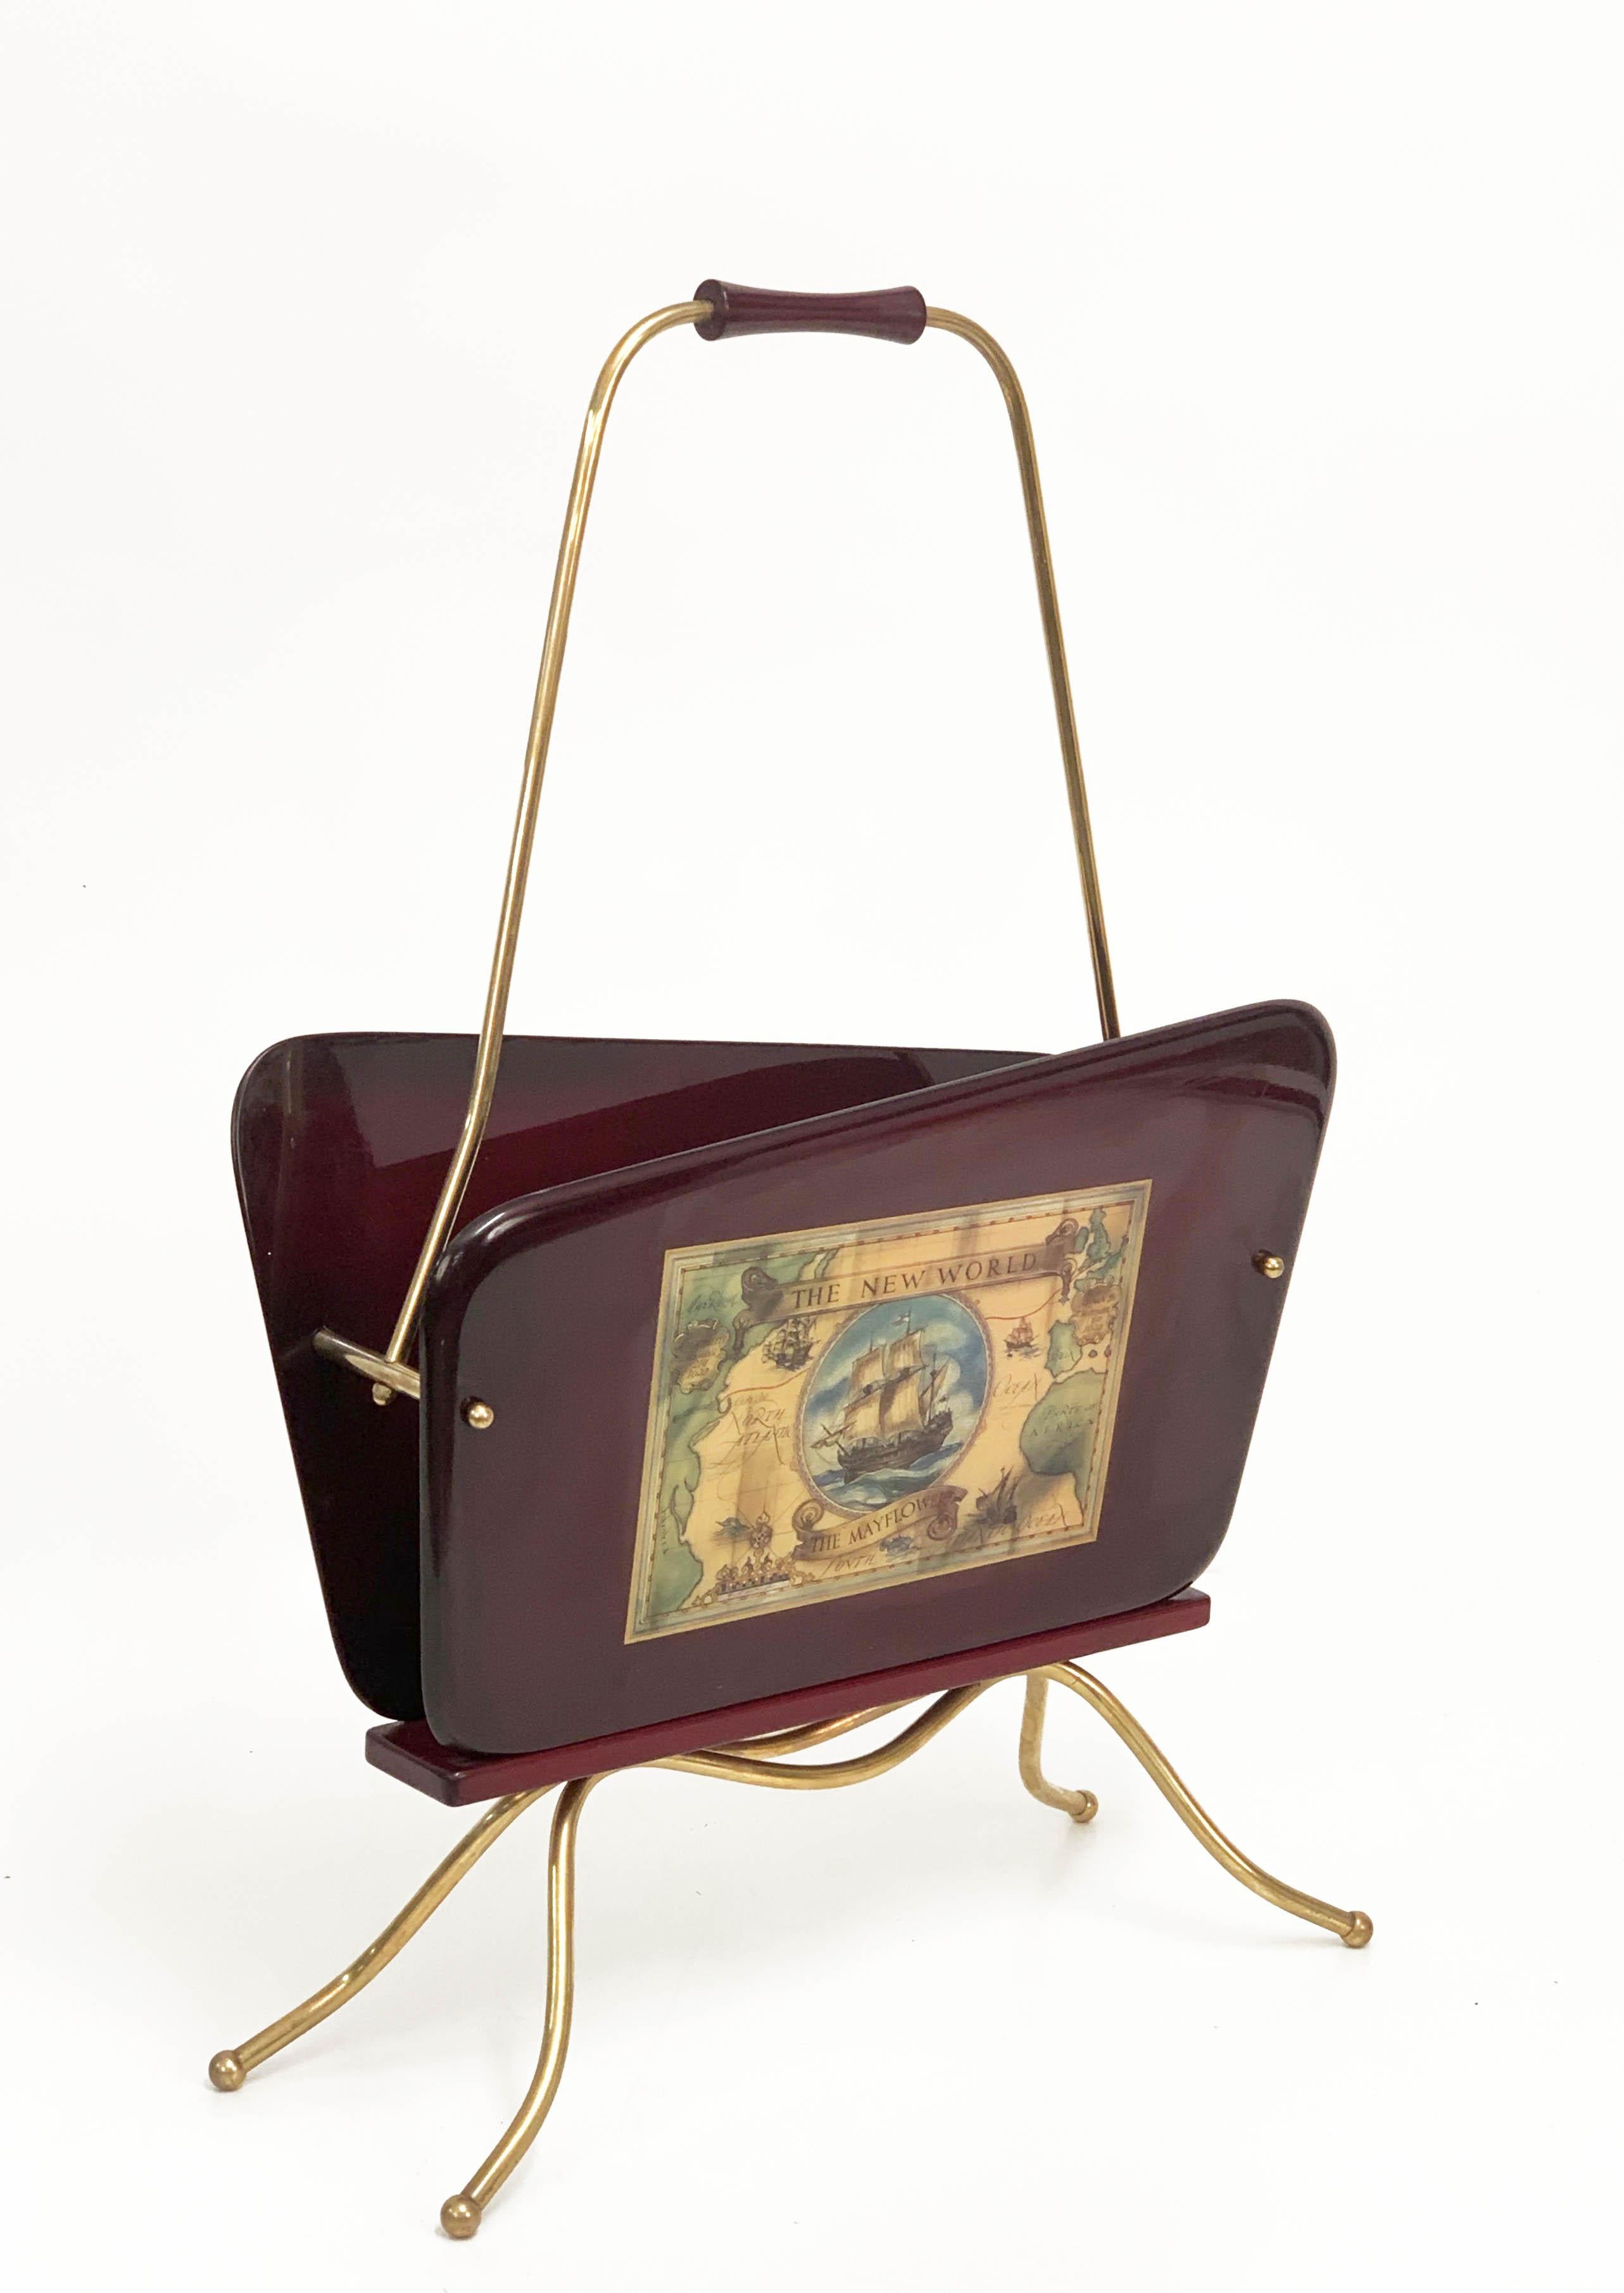 Wonderful Gio Ponti midcentury wood and brass magazine rack with two prints. This incredible piece was designed in Italy during the 1950s and it is attributed to Gio Ponti.

This item is amazing because of the asymmetrical design of the two side